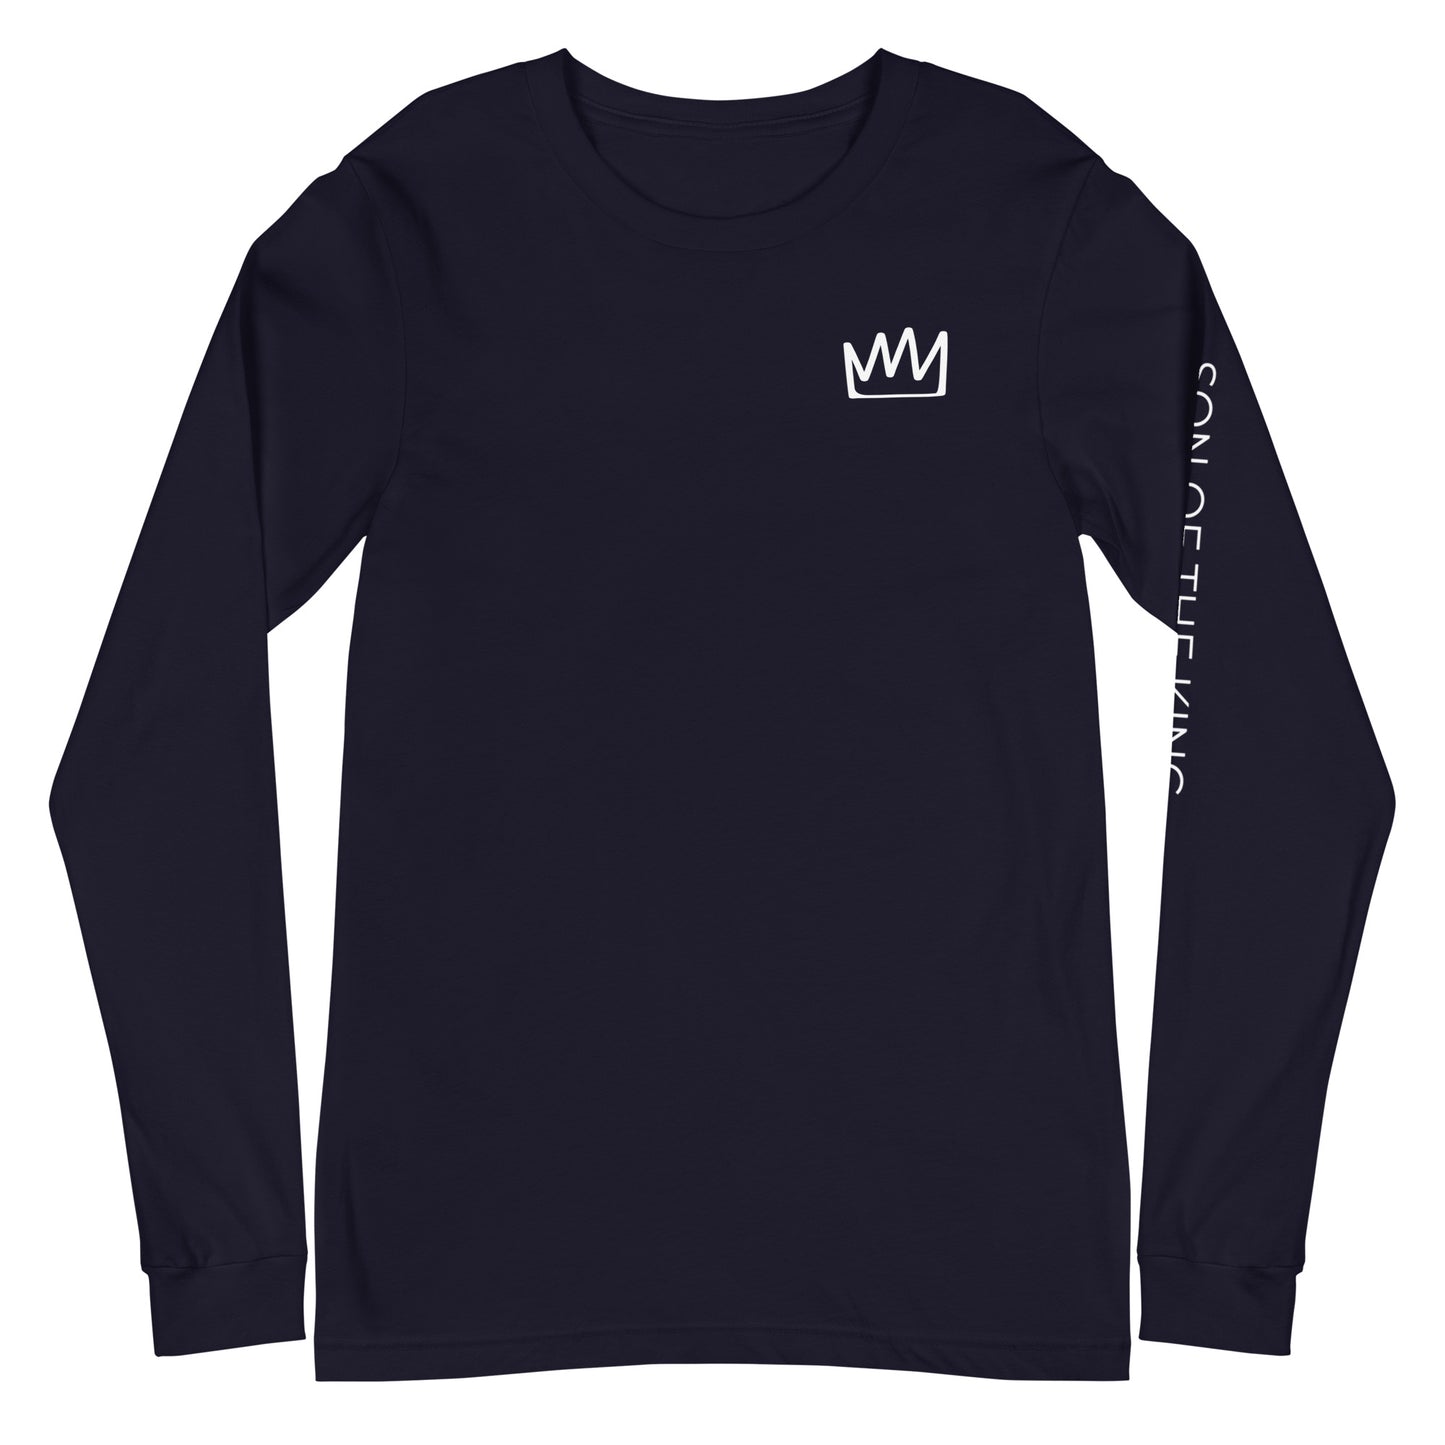 Son of the King Long Sleeve Tee